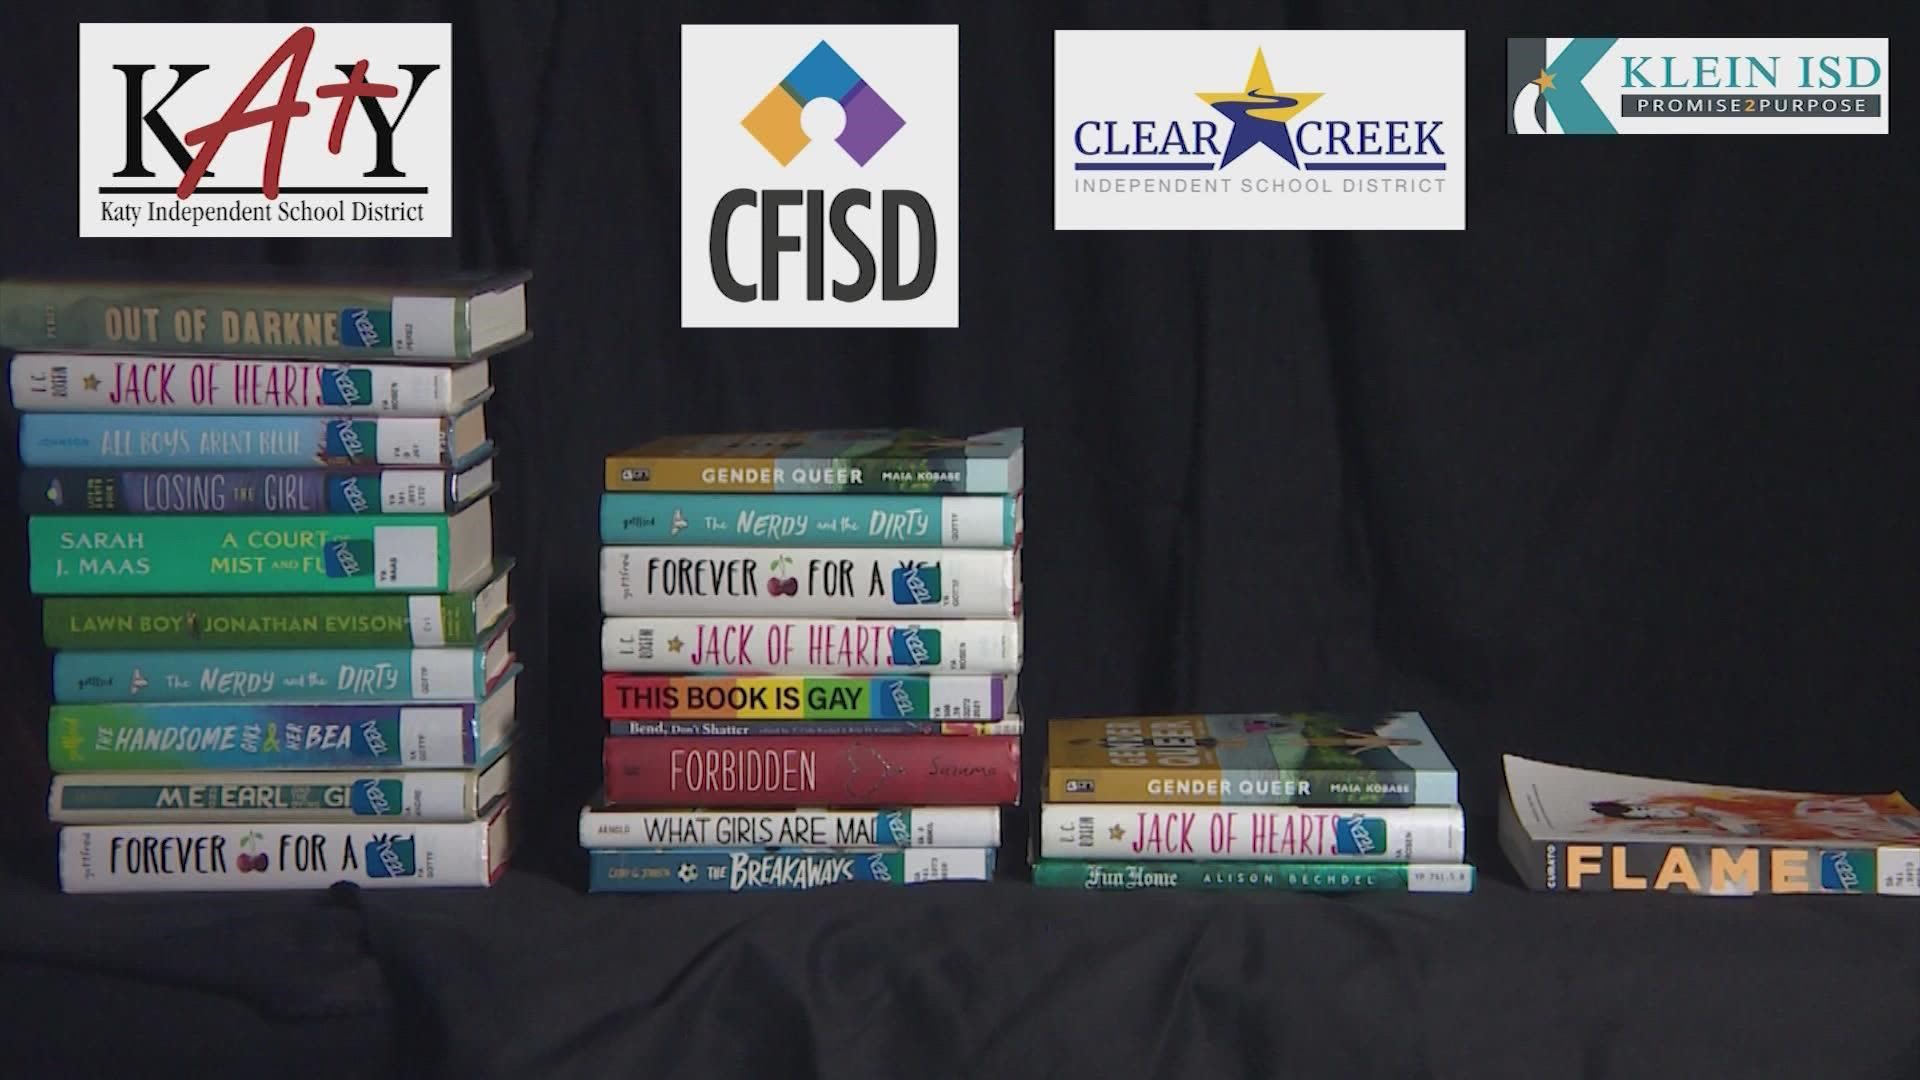 A KHOU 11 News Investigation revealed that several Houston-are school districts have banned and restricted access to several books.